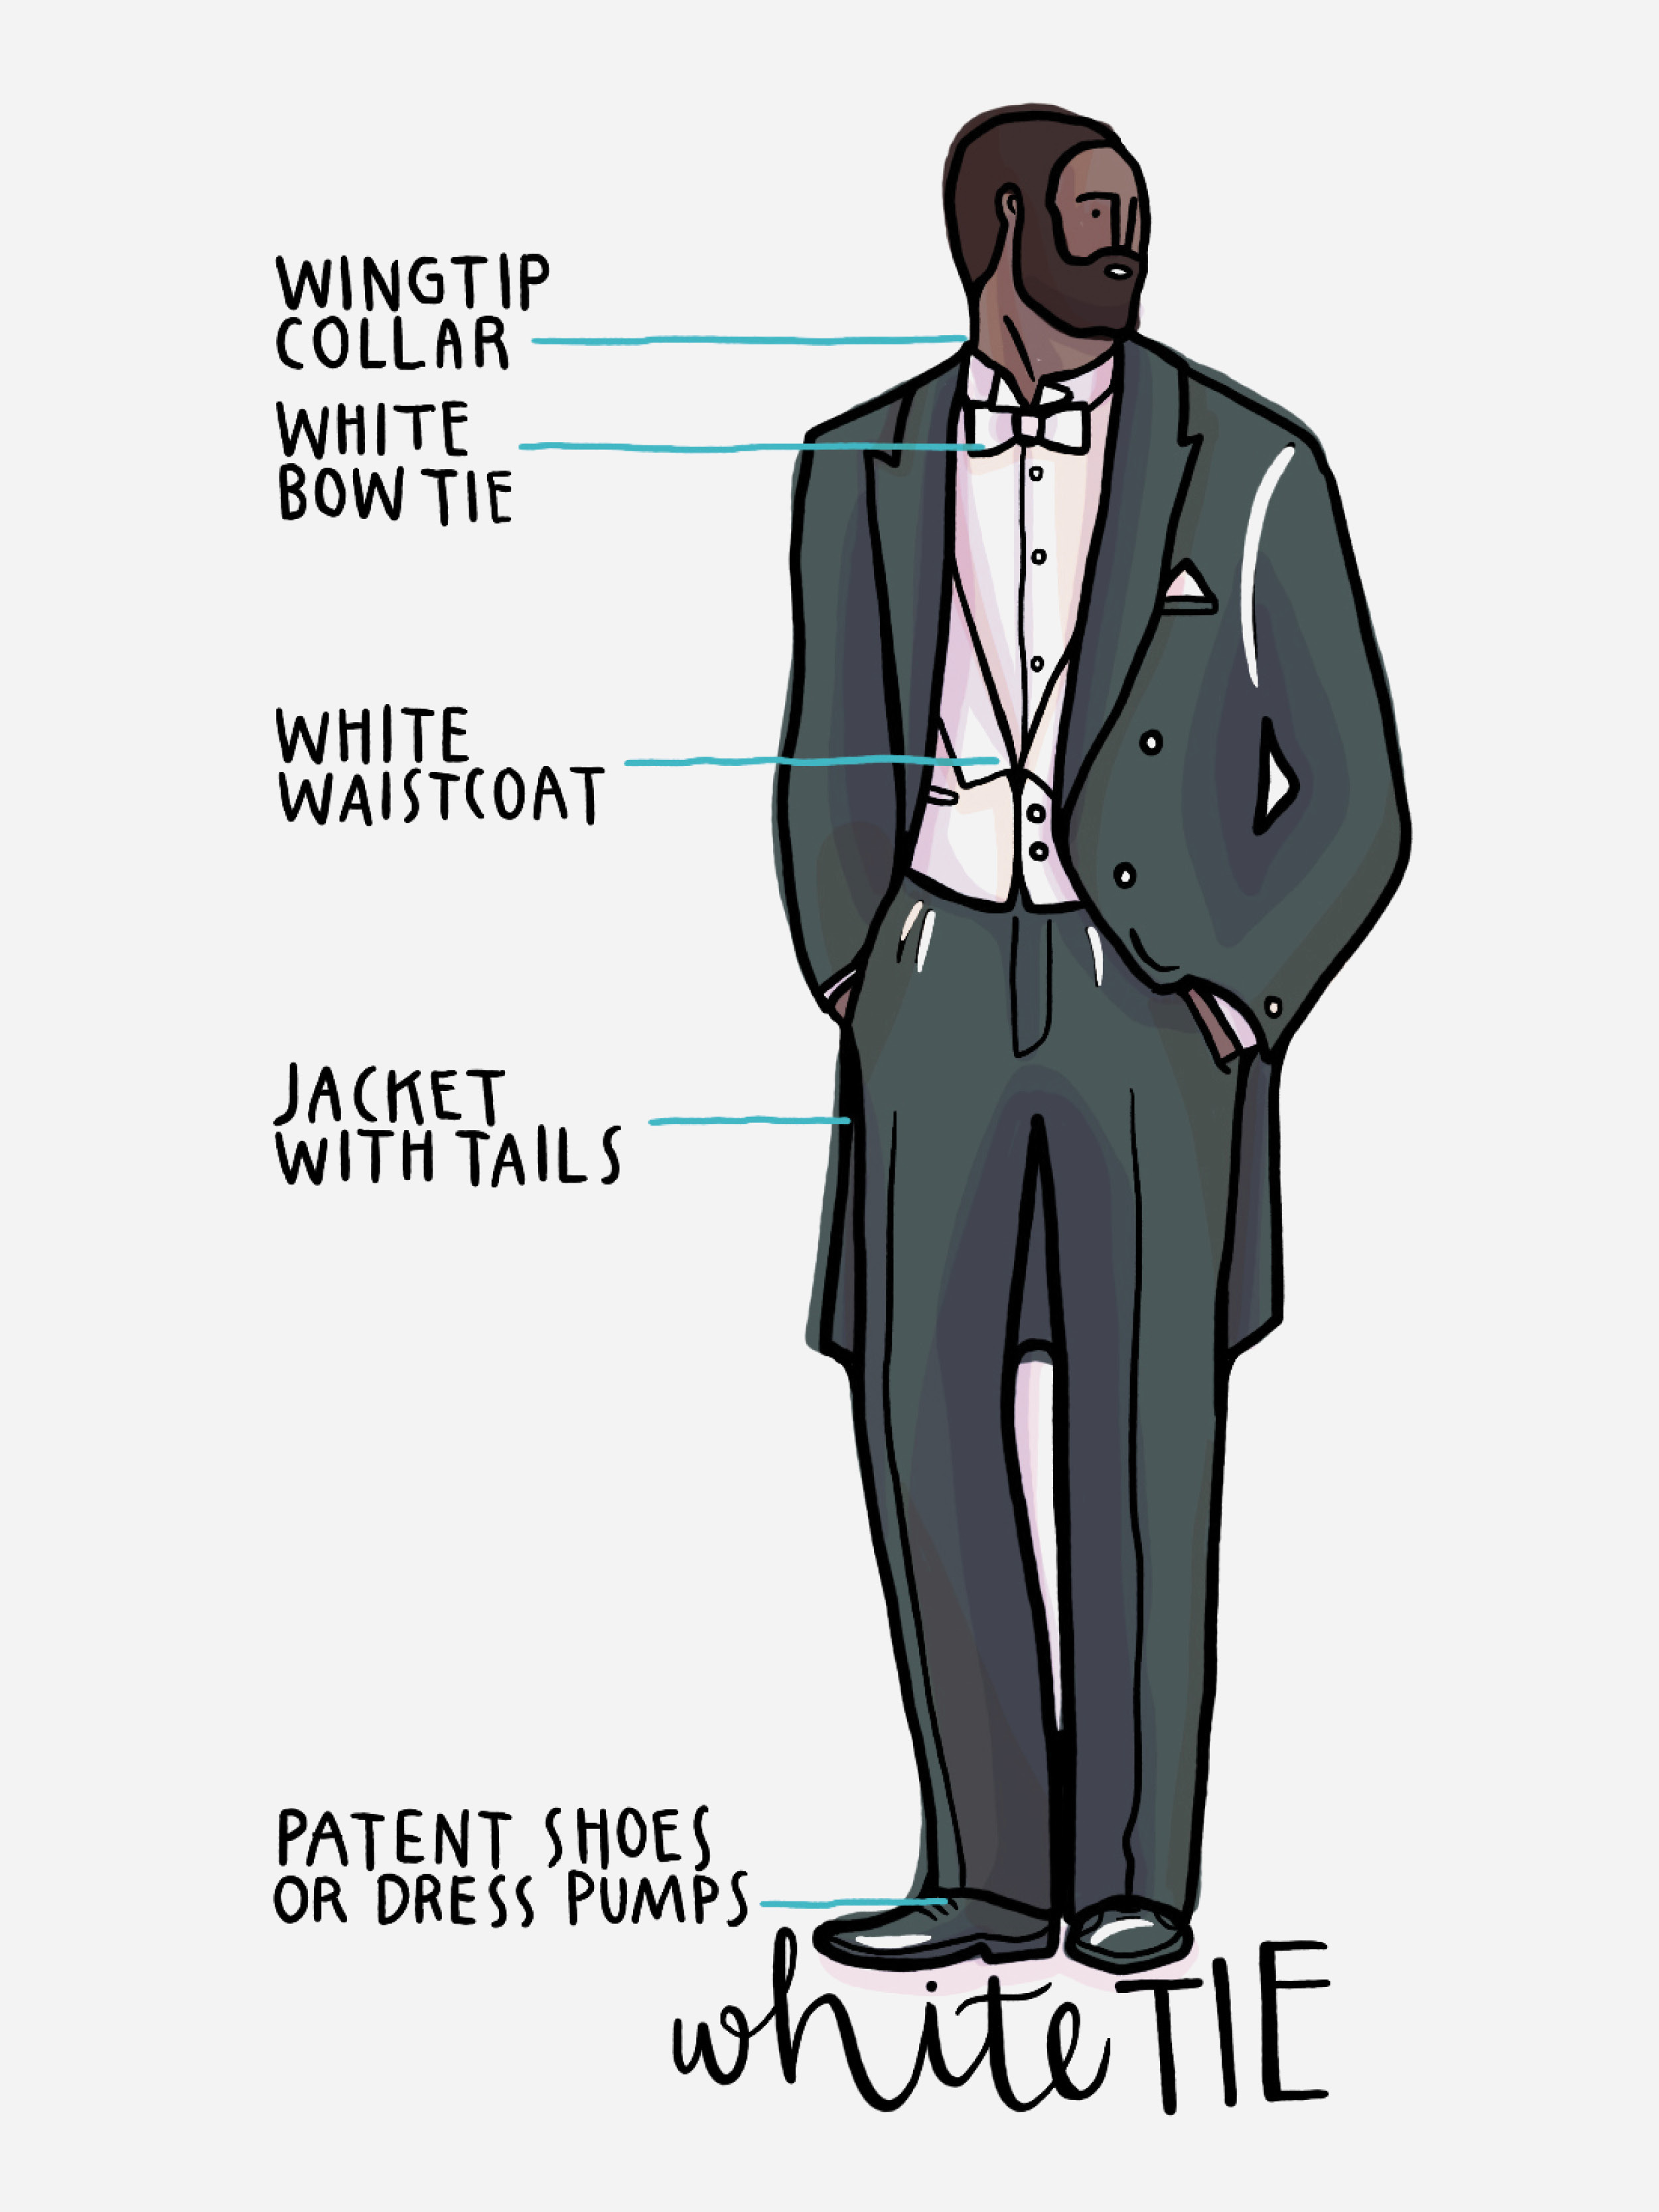 What is the difference between black-tie and formal attire at